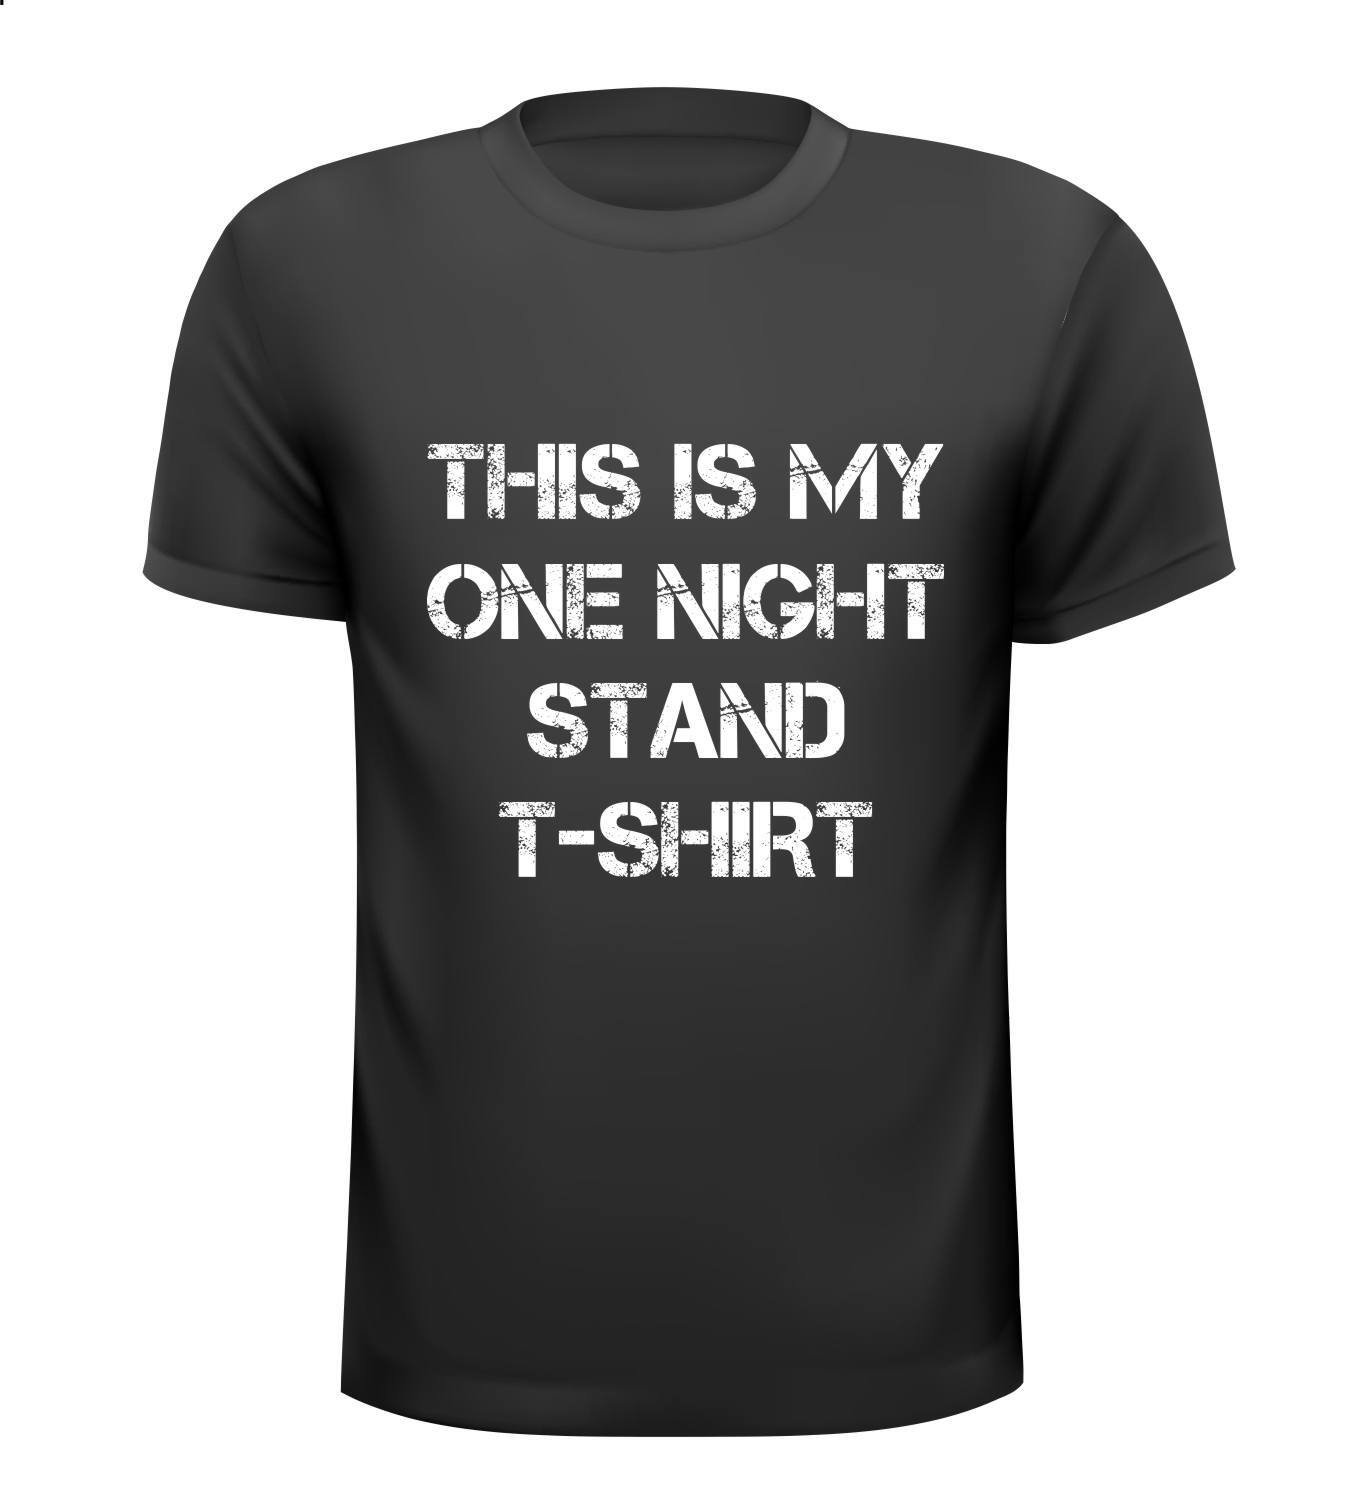 This is my one night stand t-shirt